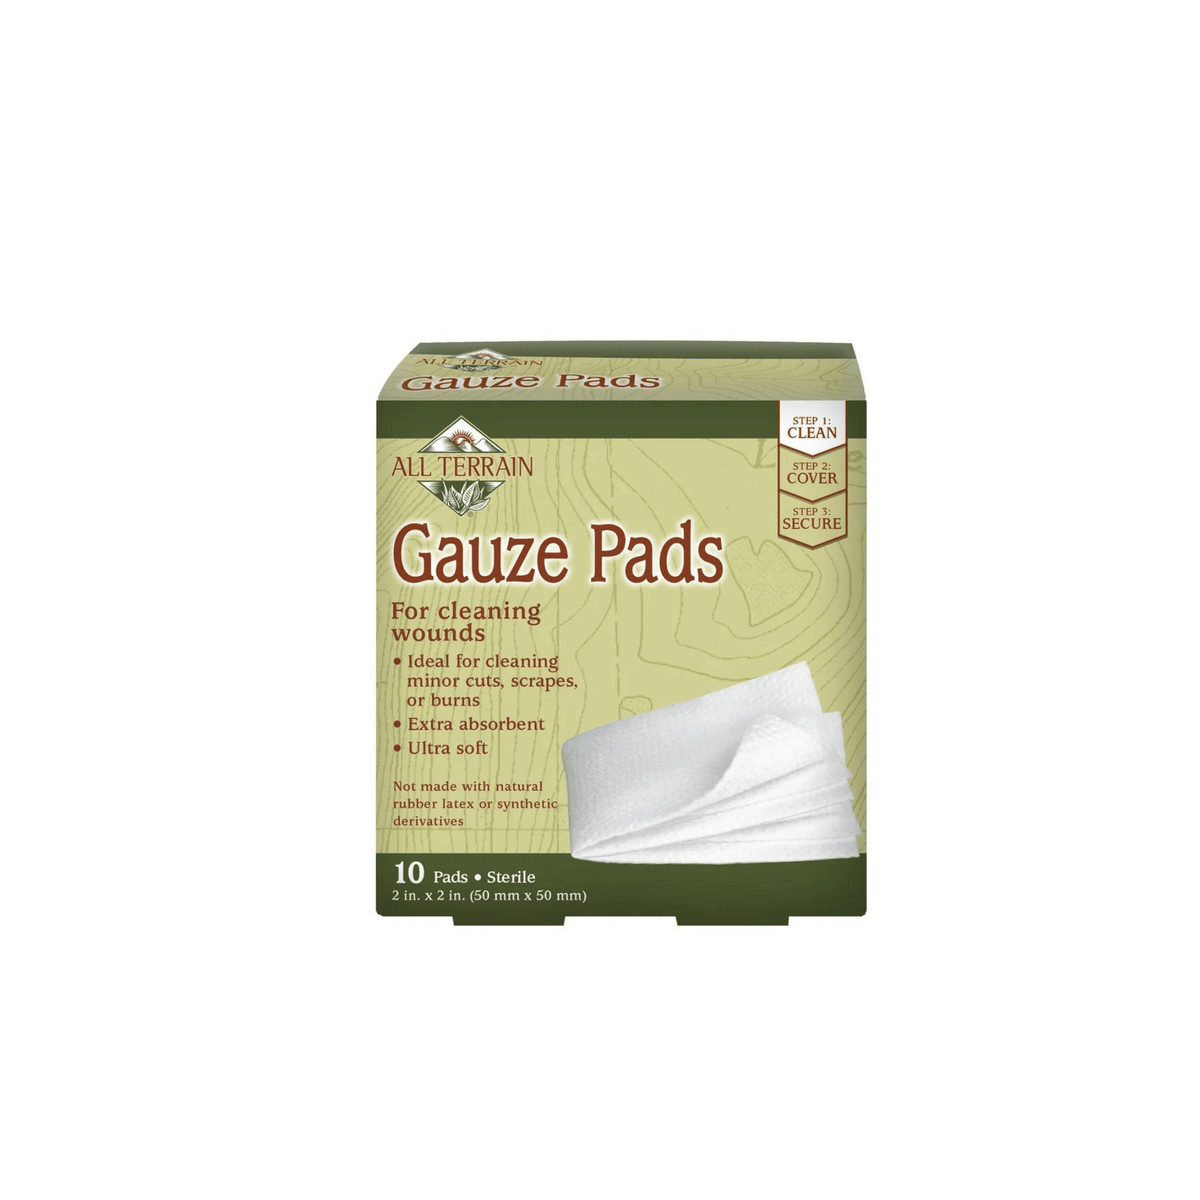 Primary Image of Gauze Pads